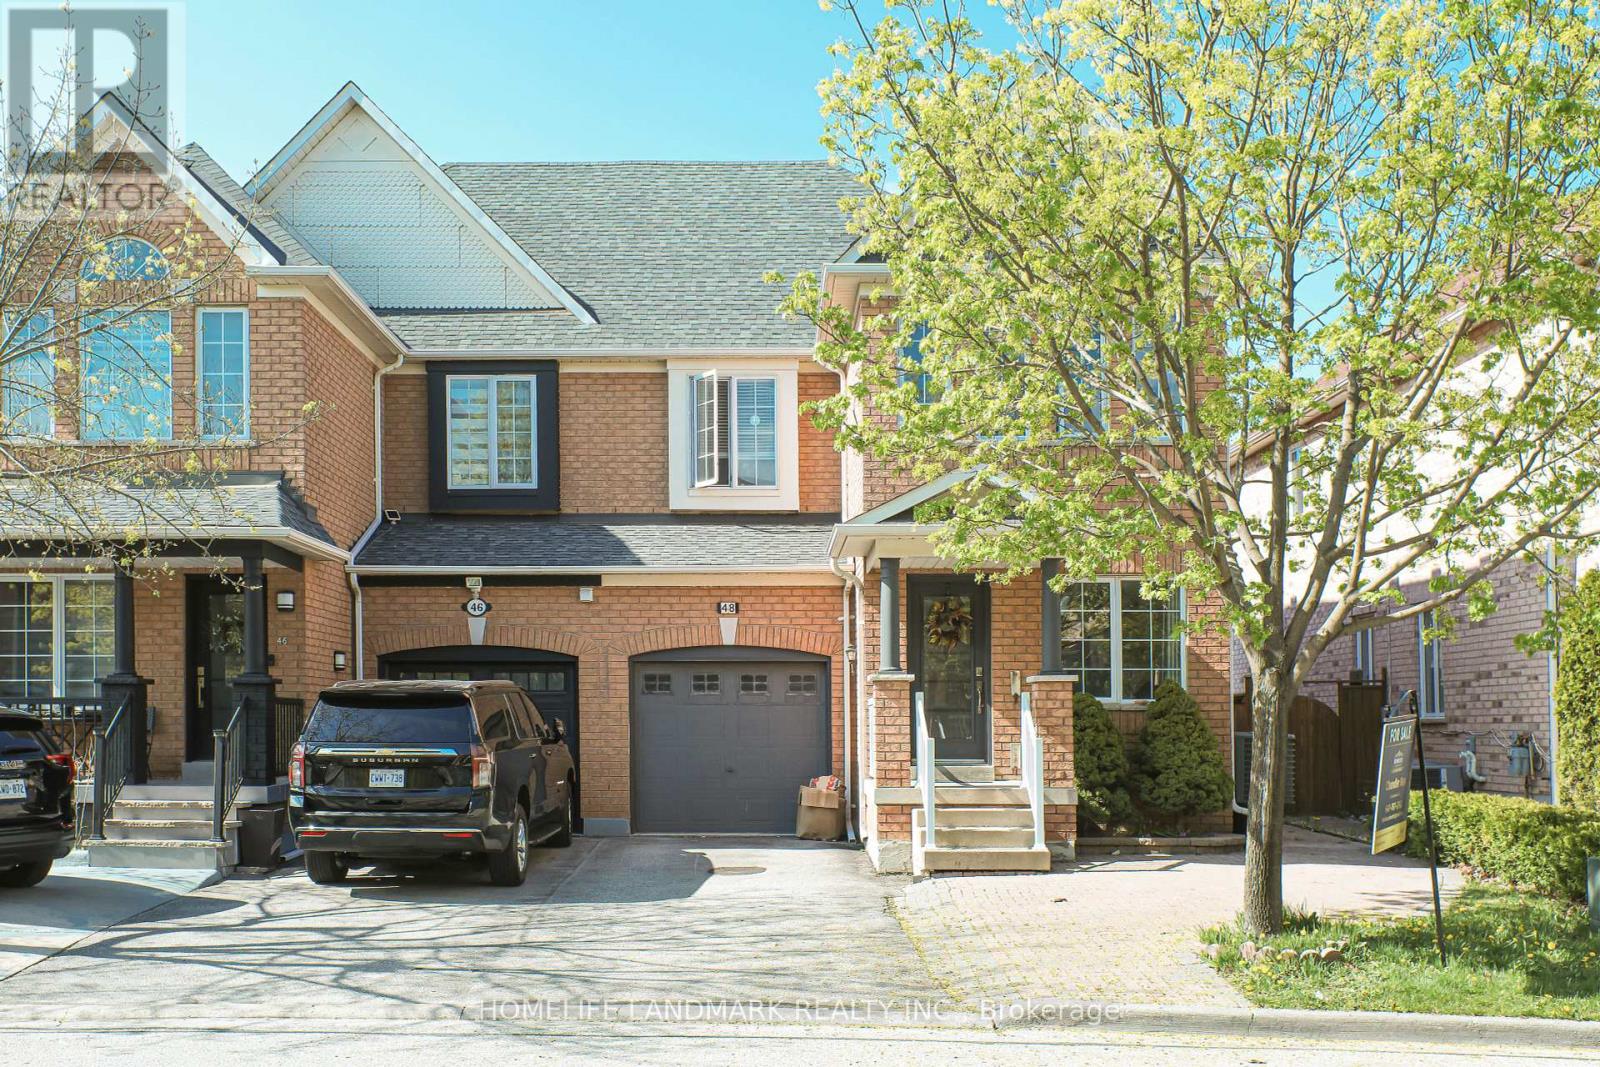 4 Bedroom Residential Home For Sale | 48 Hollywood Hill Circ | Vaughan | L4H2P4